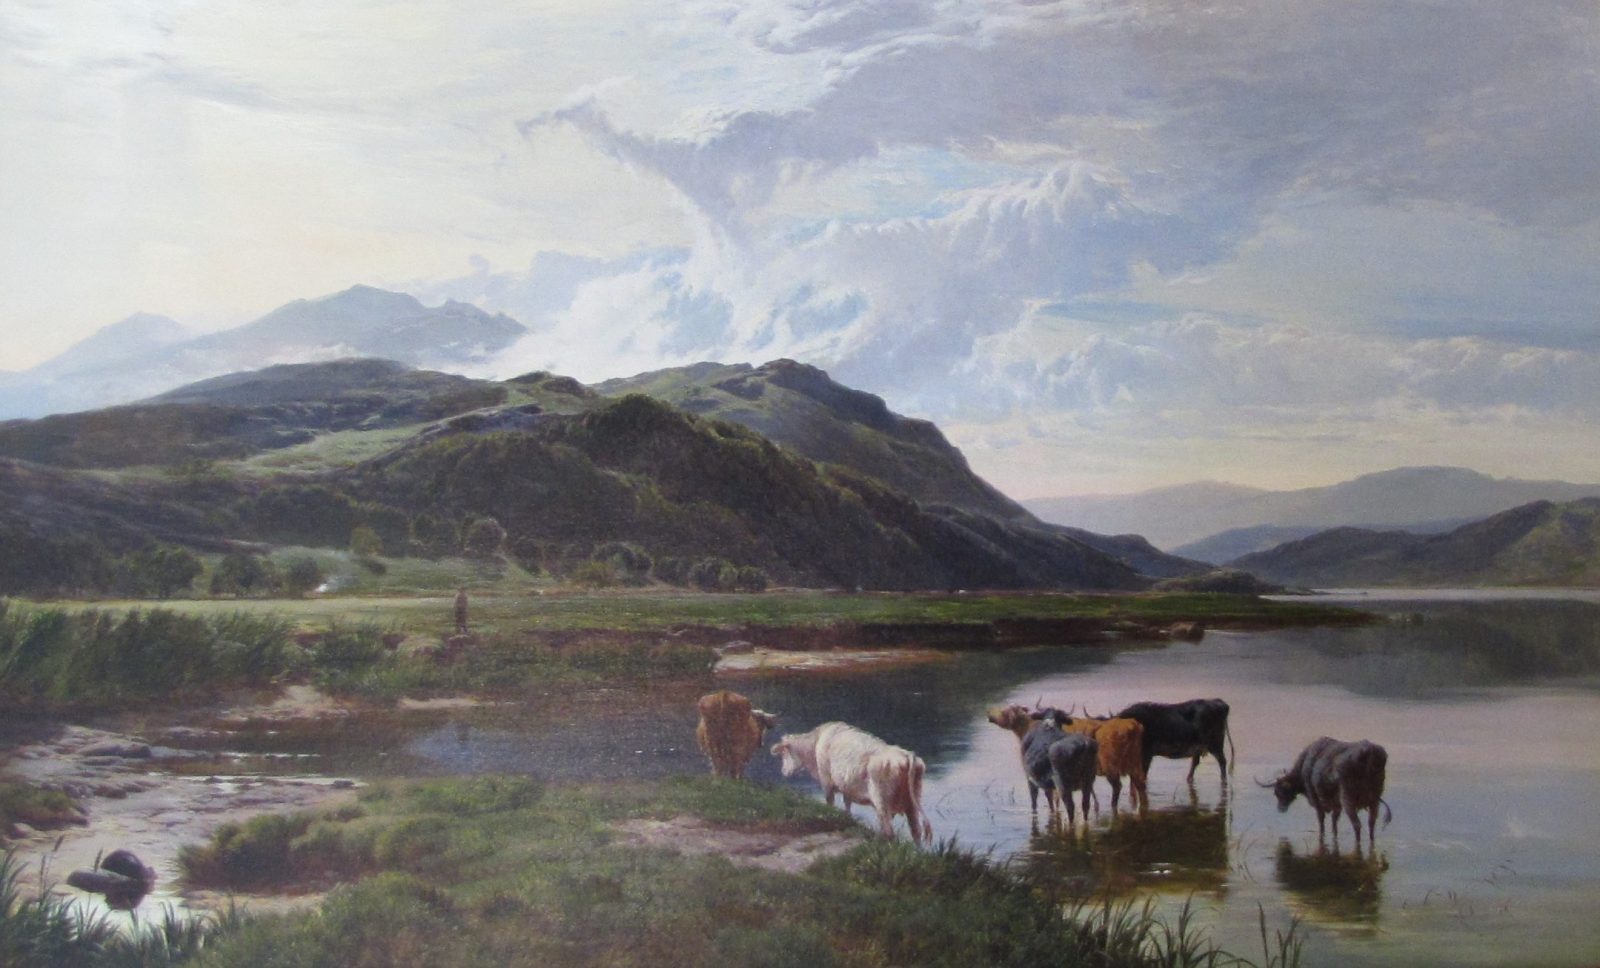 Works of art, like this oil painting of cattle watering in a highland landscape by Sidney Richard Percy used to carry a high insurance valuation. Now unfortunately these wonderful paintings have dramatically fallen in value due to changes in decorative taste.